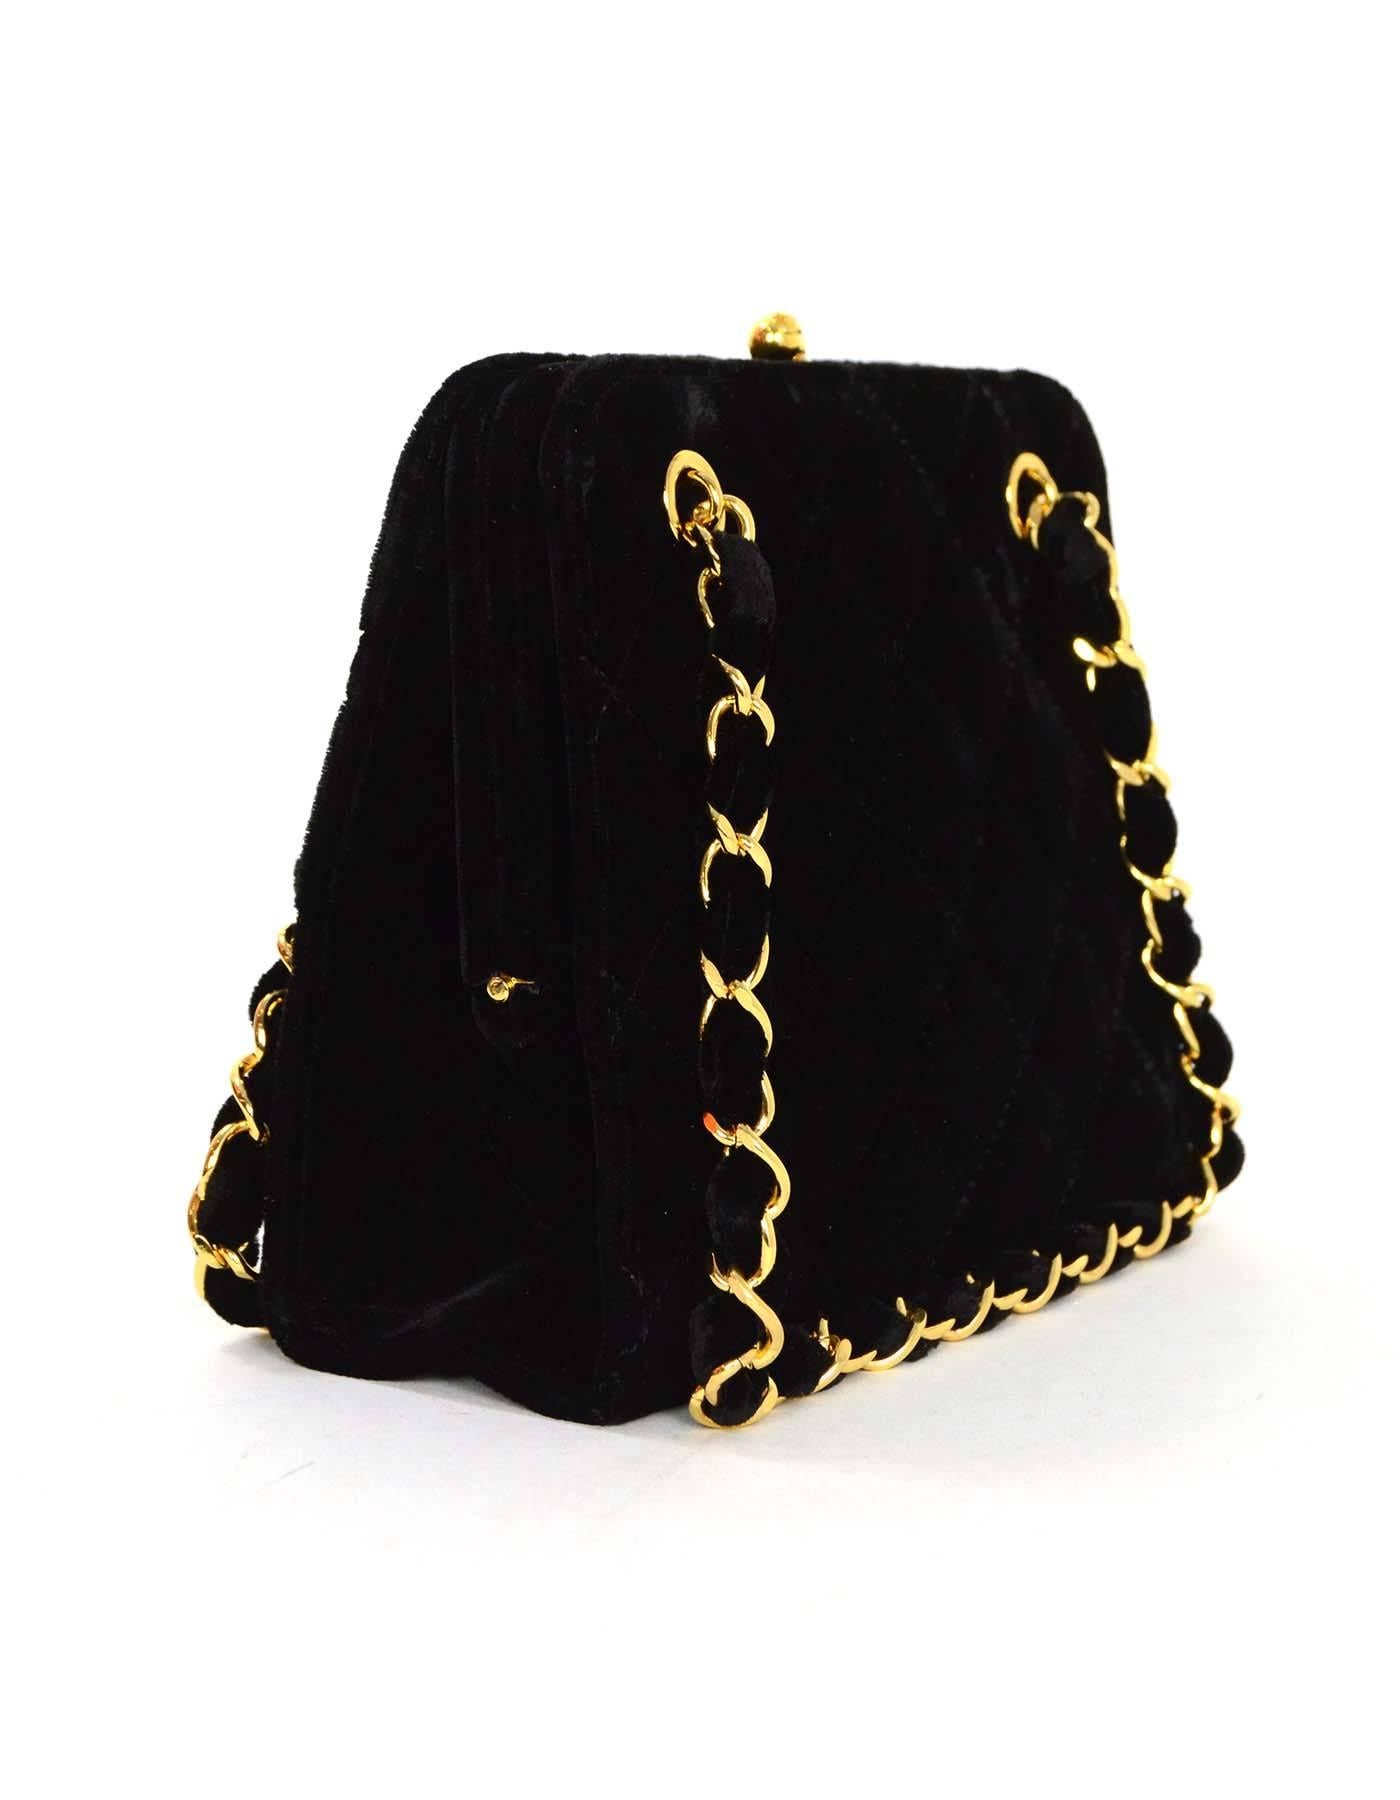 Chanel Vintage 97' Black Velvet Quilted Mini Frame Evening Bag GHW   
Features velvet quilting and kiss lock closure

Made In: Italy
Year of Production: 1996-1997
Color: Black
Hardware: Goldtone
Materials: Velvet and metal
Lining: Gold